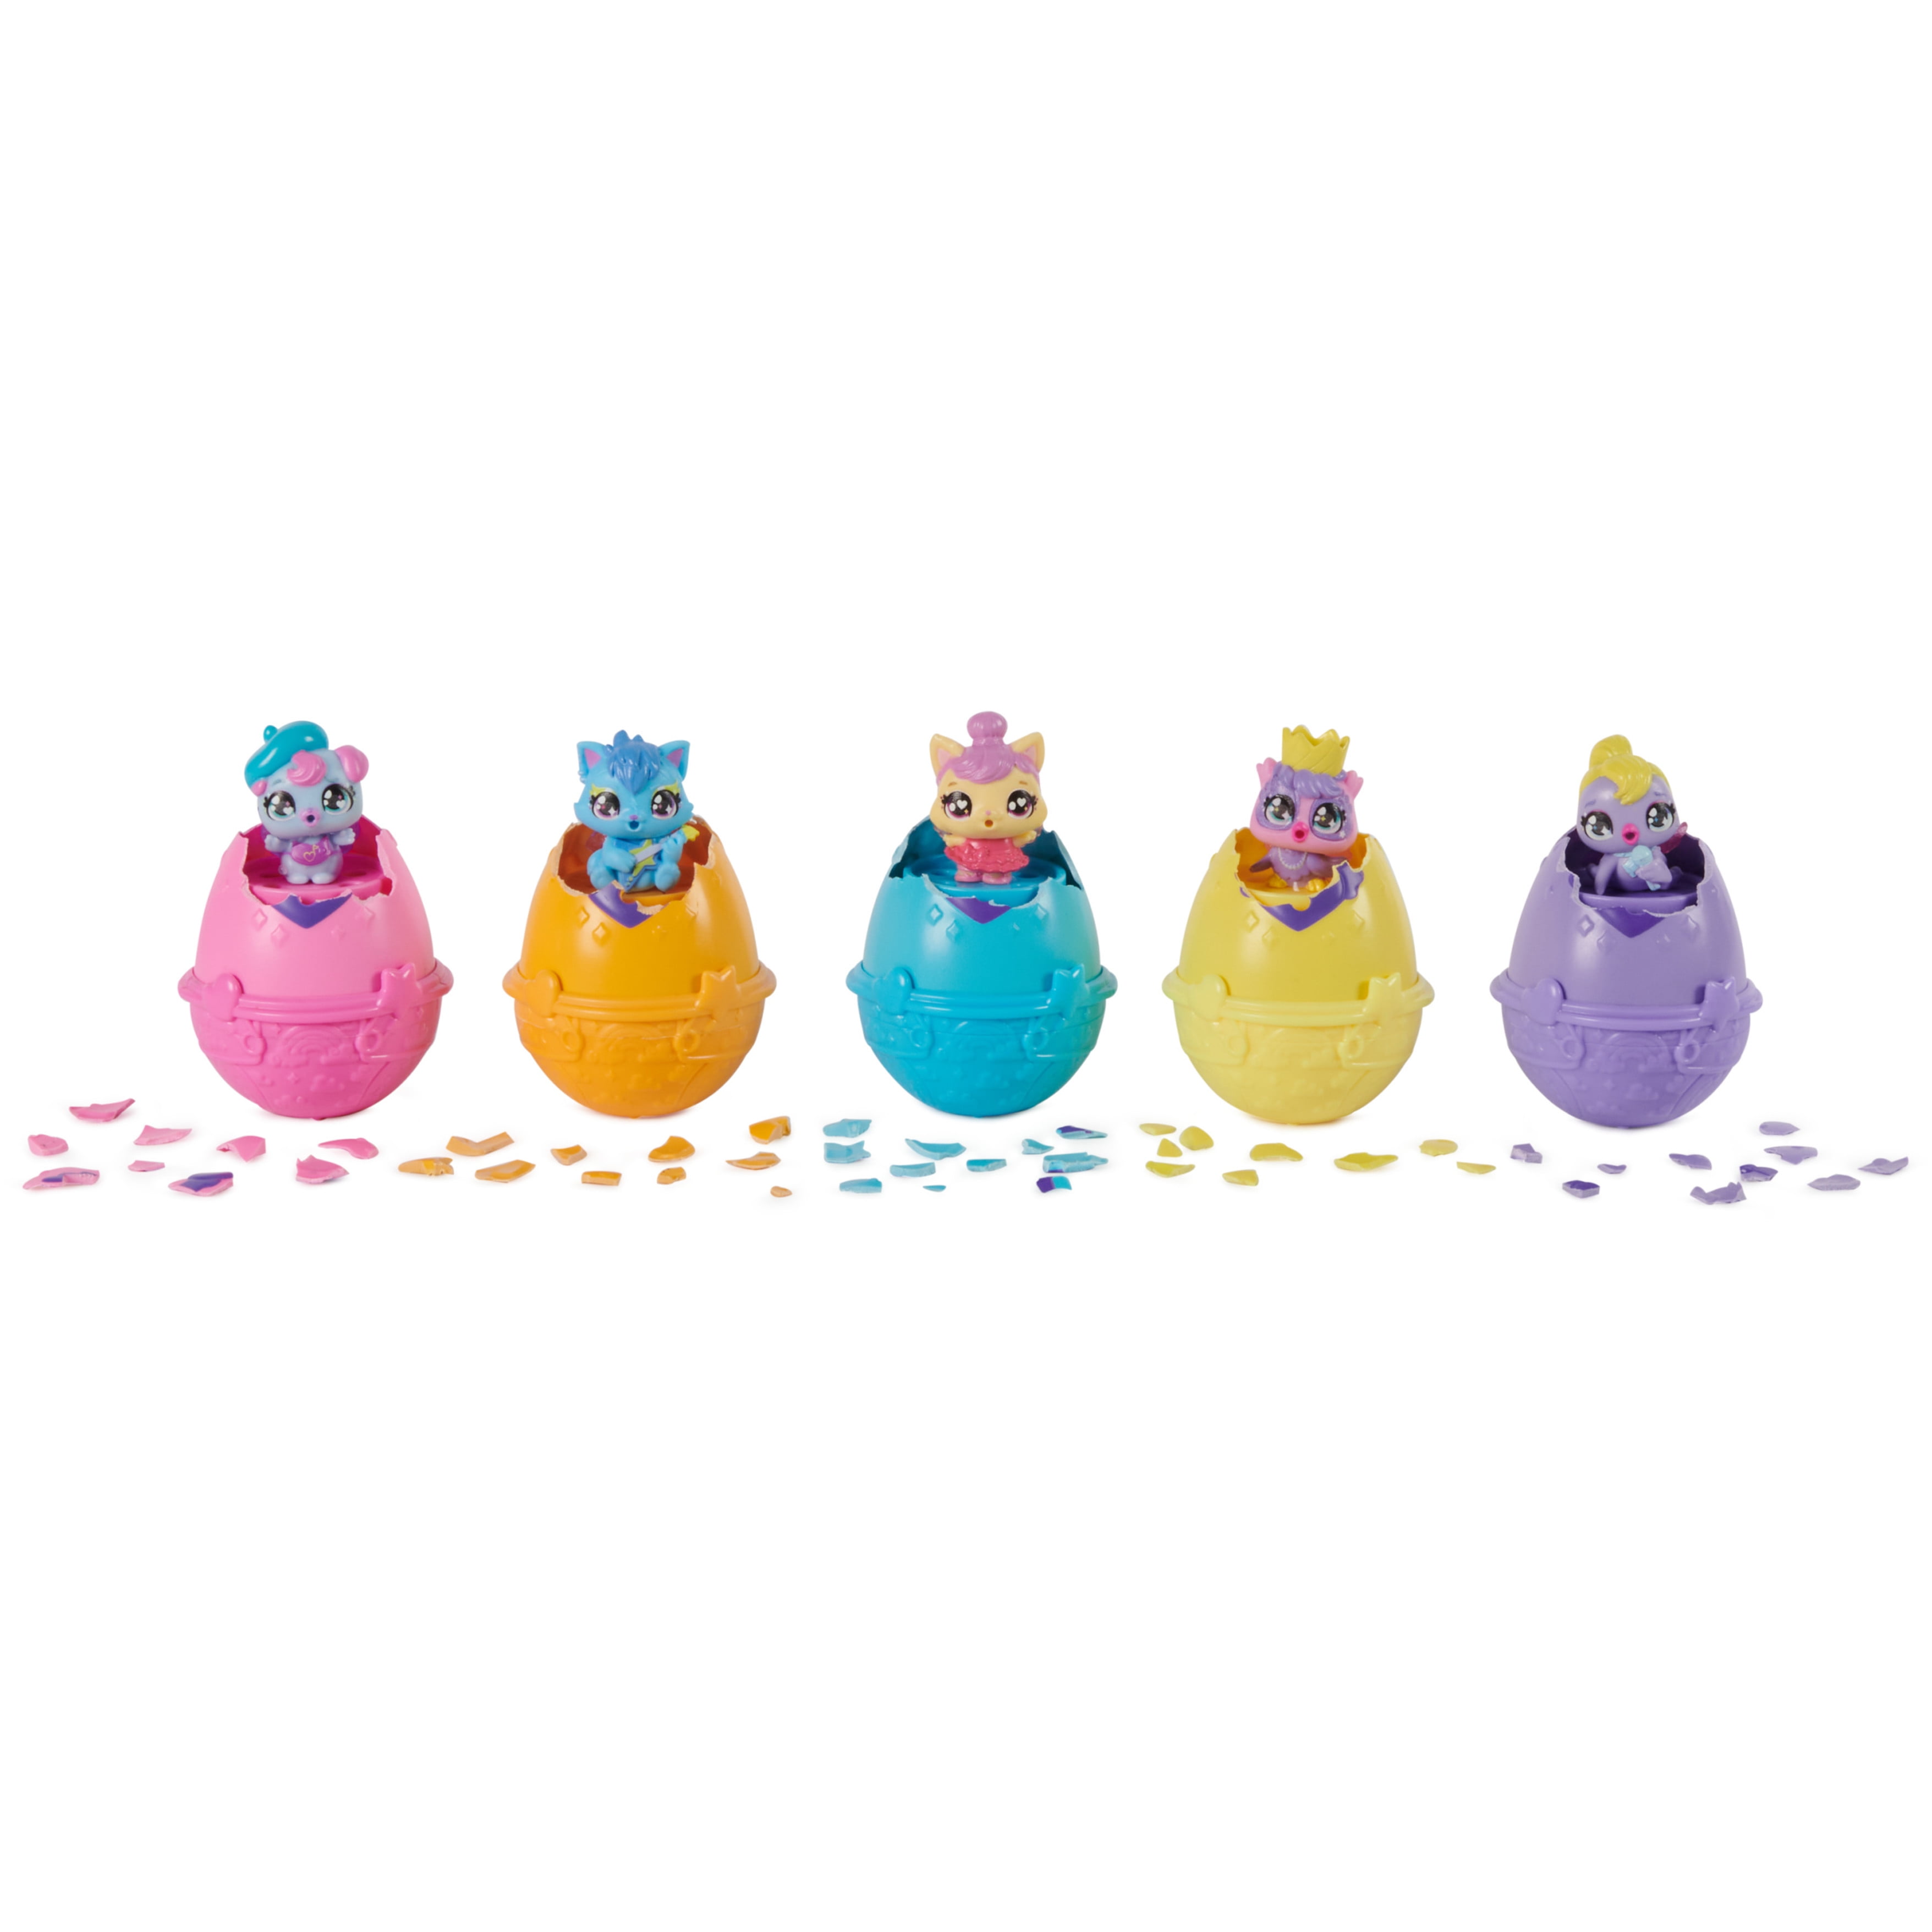  Hatchimals Alive, Egg Carton Toy with 5 Mini Figures in  Self-Hatching Eggs, 11 Accessories, Kids Toys for Girls and Boys Ages 3 and  up : Toys & Games